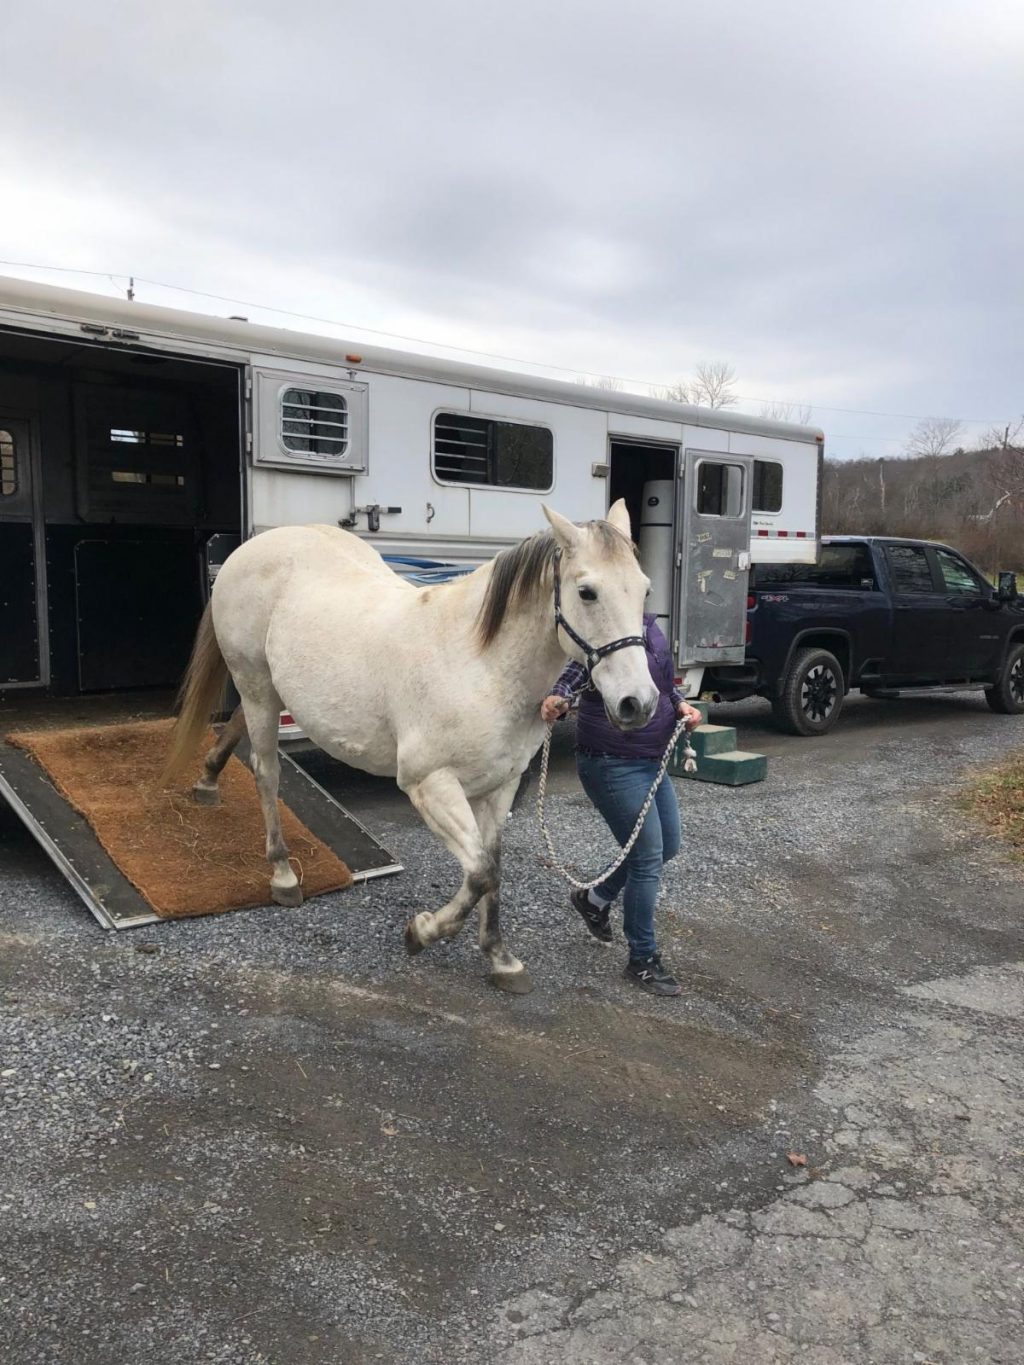 Moon, a gray quarter horse gelding, being led out of the horse trucl